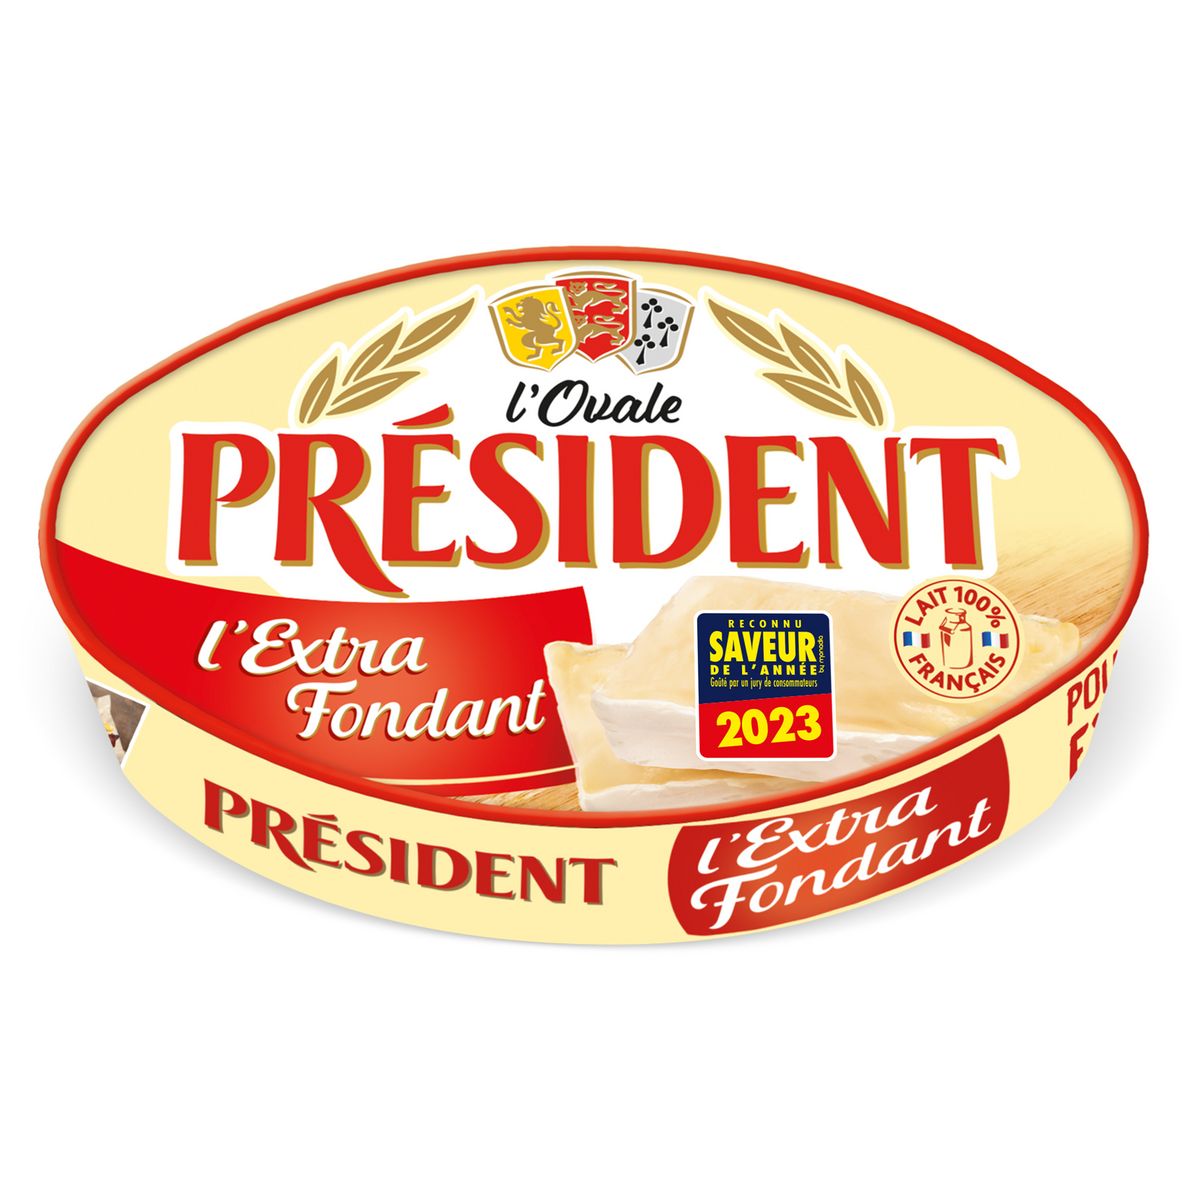 President L'Ovale extra fondant cheese 200g